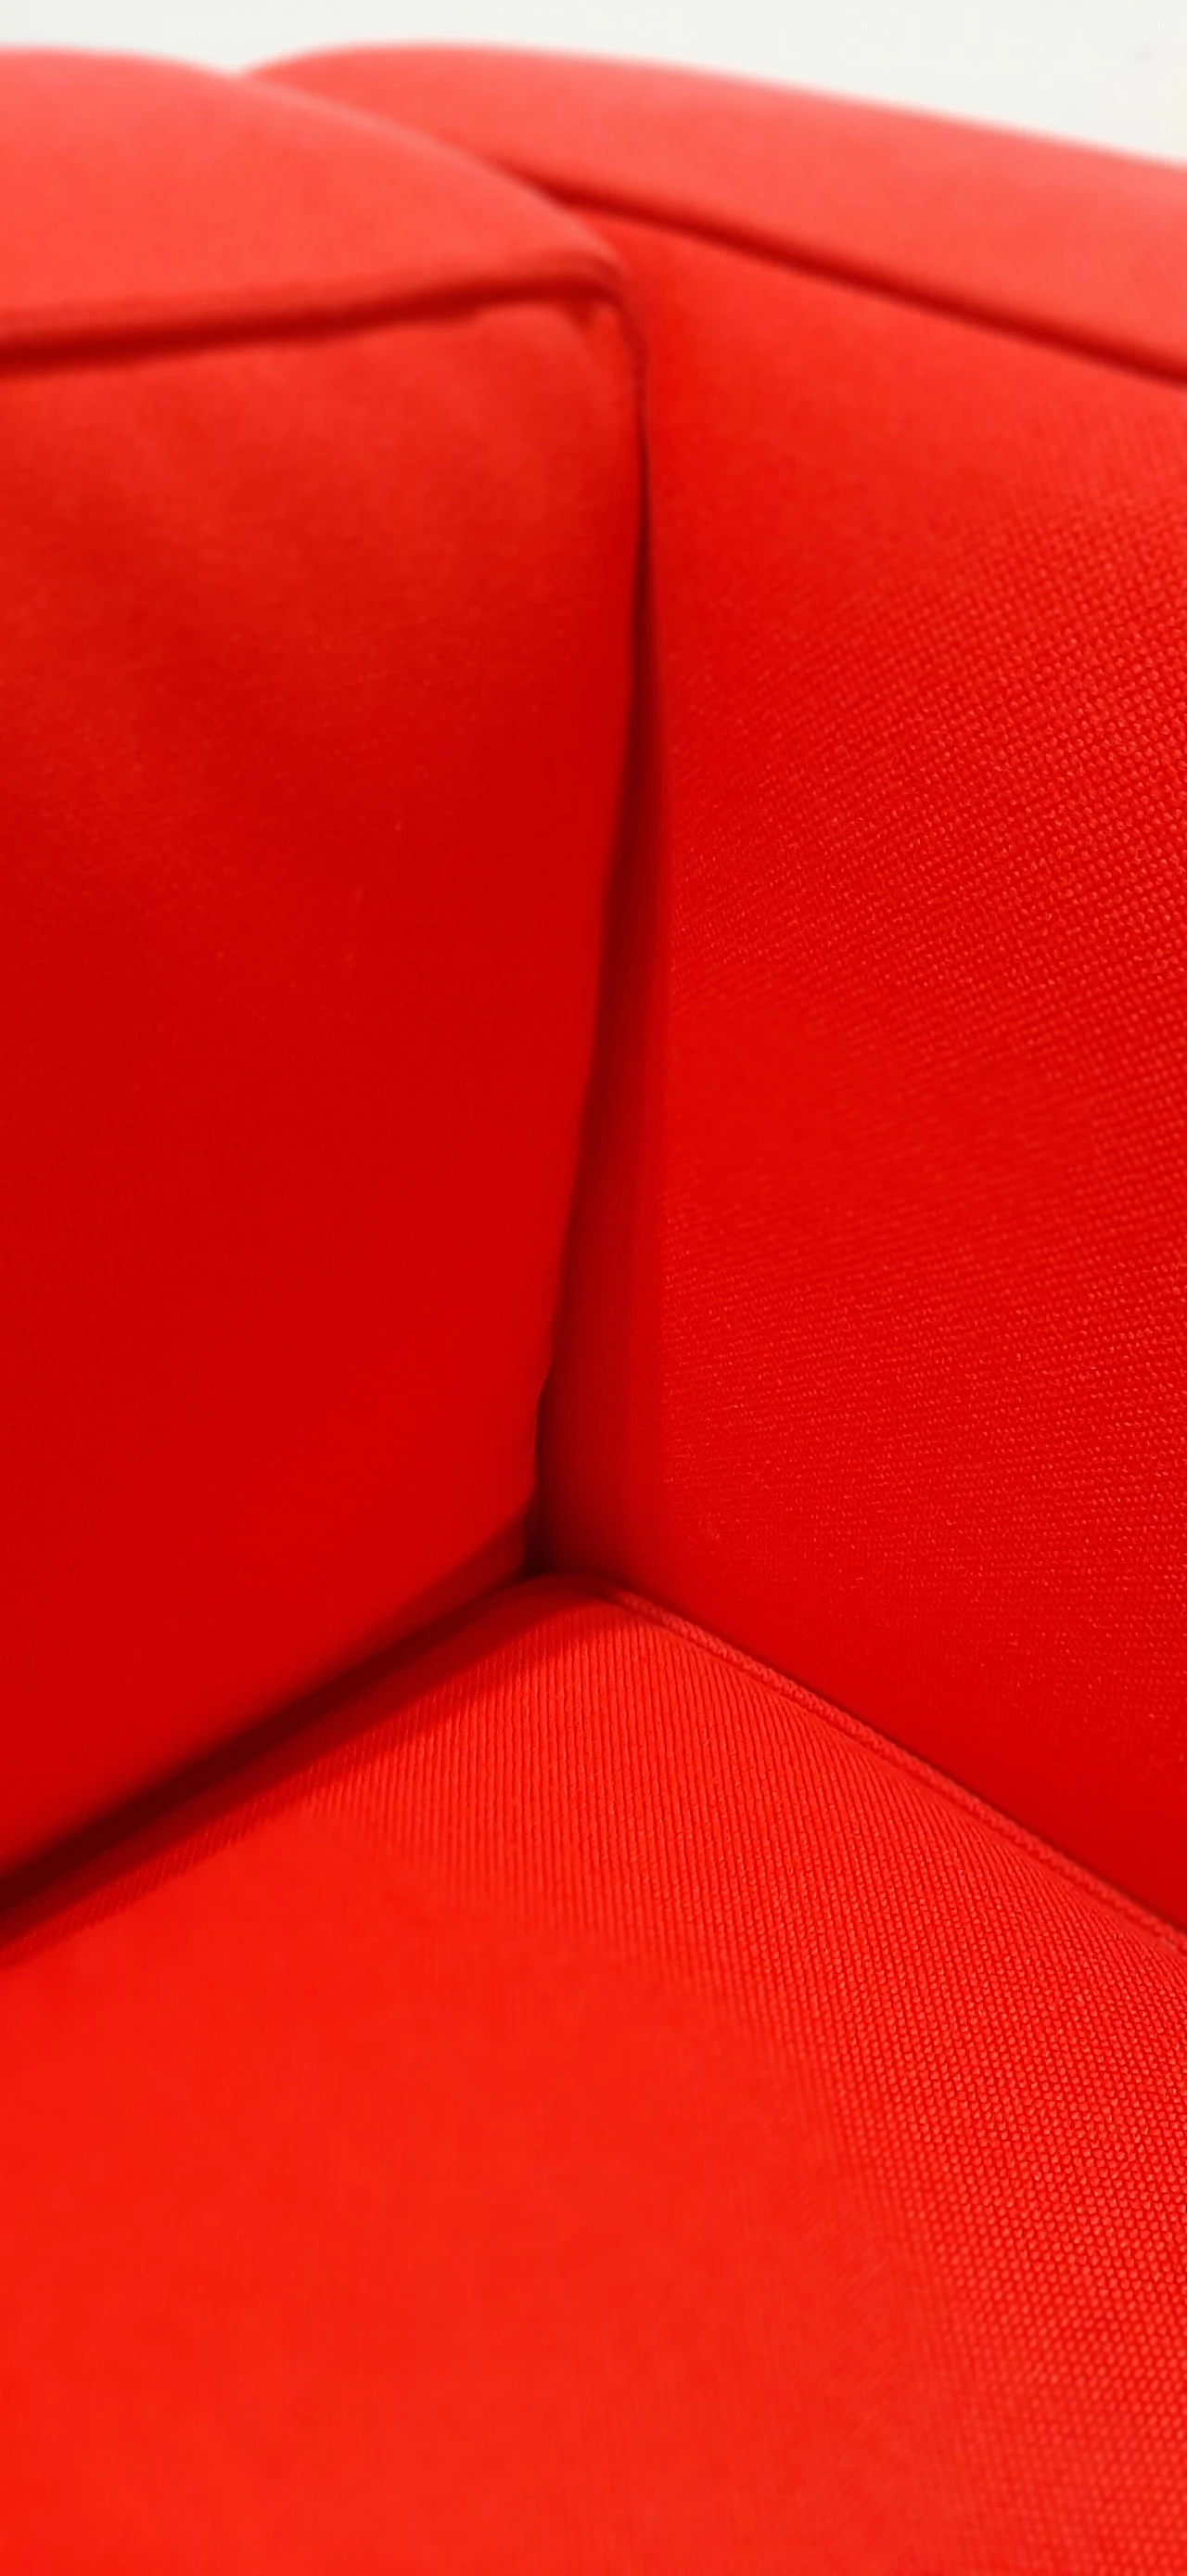 LC 2 armchair in red cotton by Le Corbusier, P. Jeanneret, C. Perriand for Alivar, 1980s 63